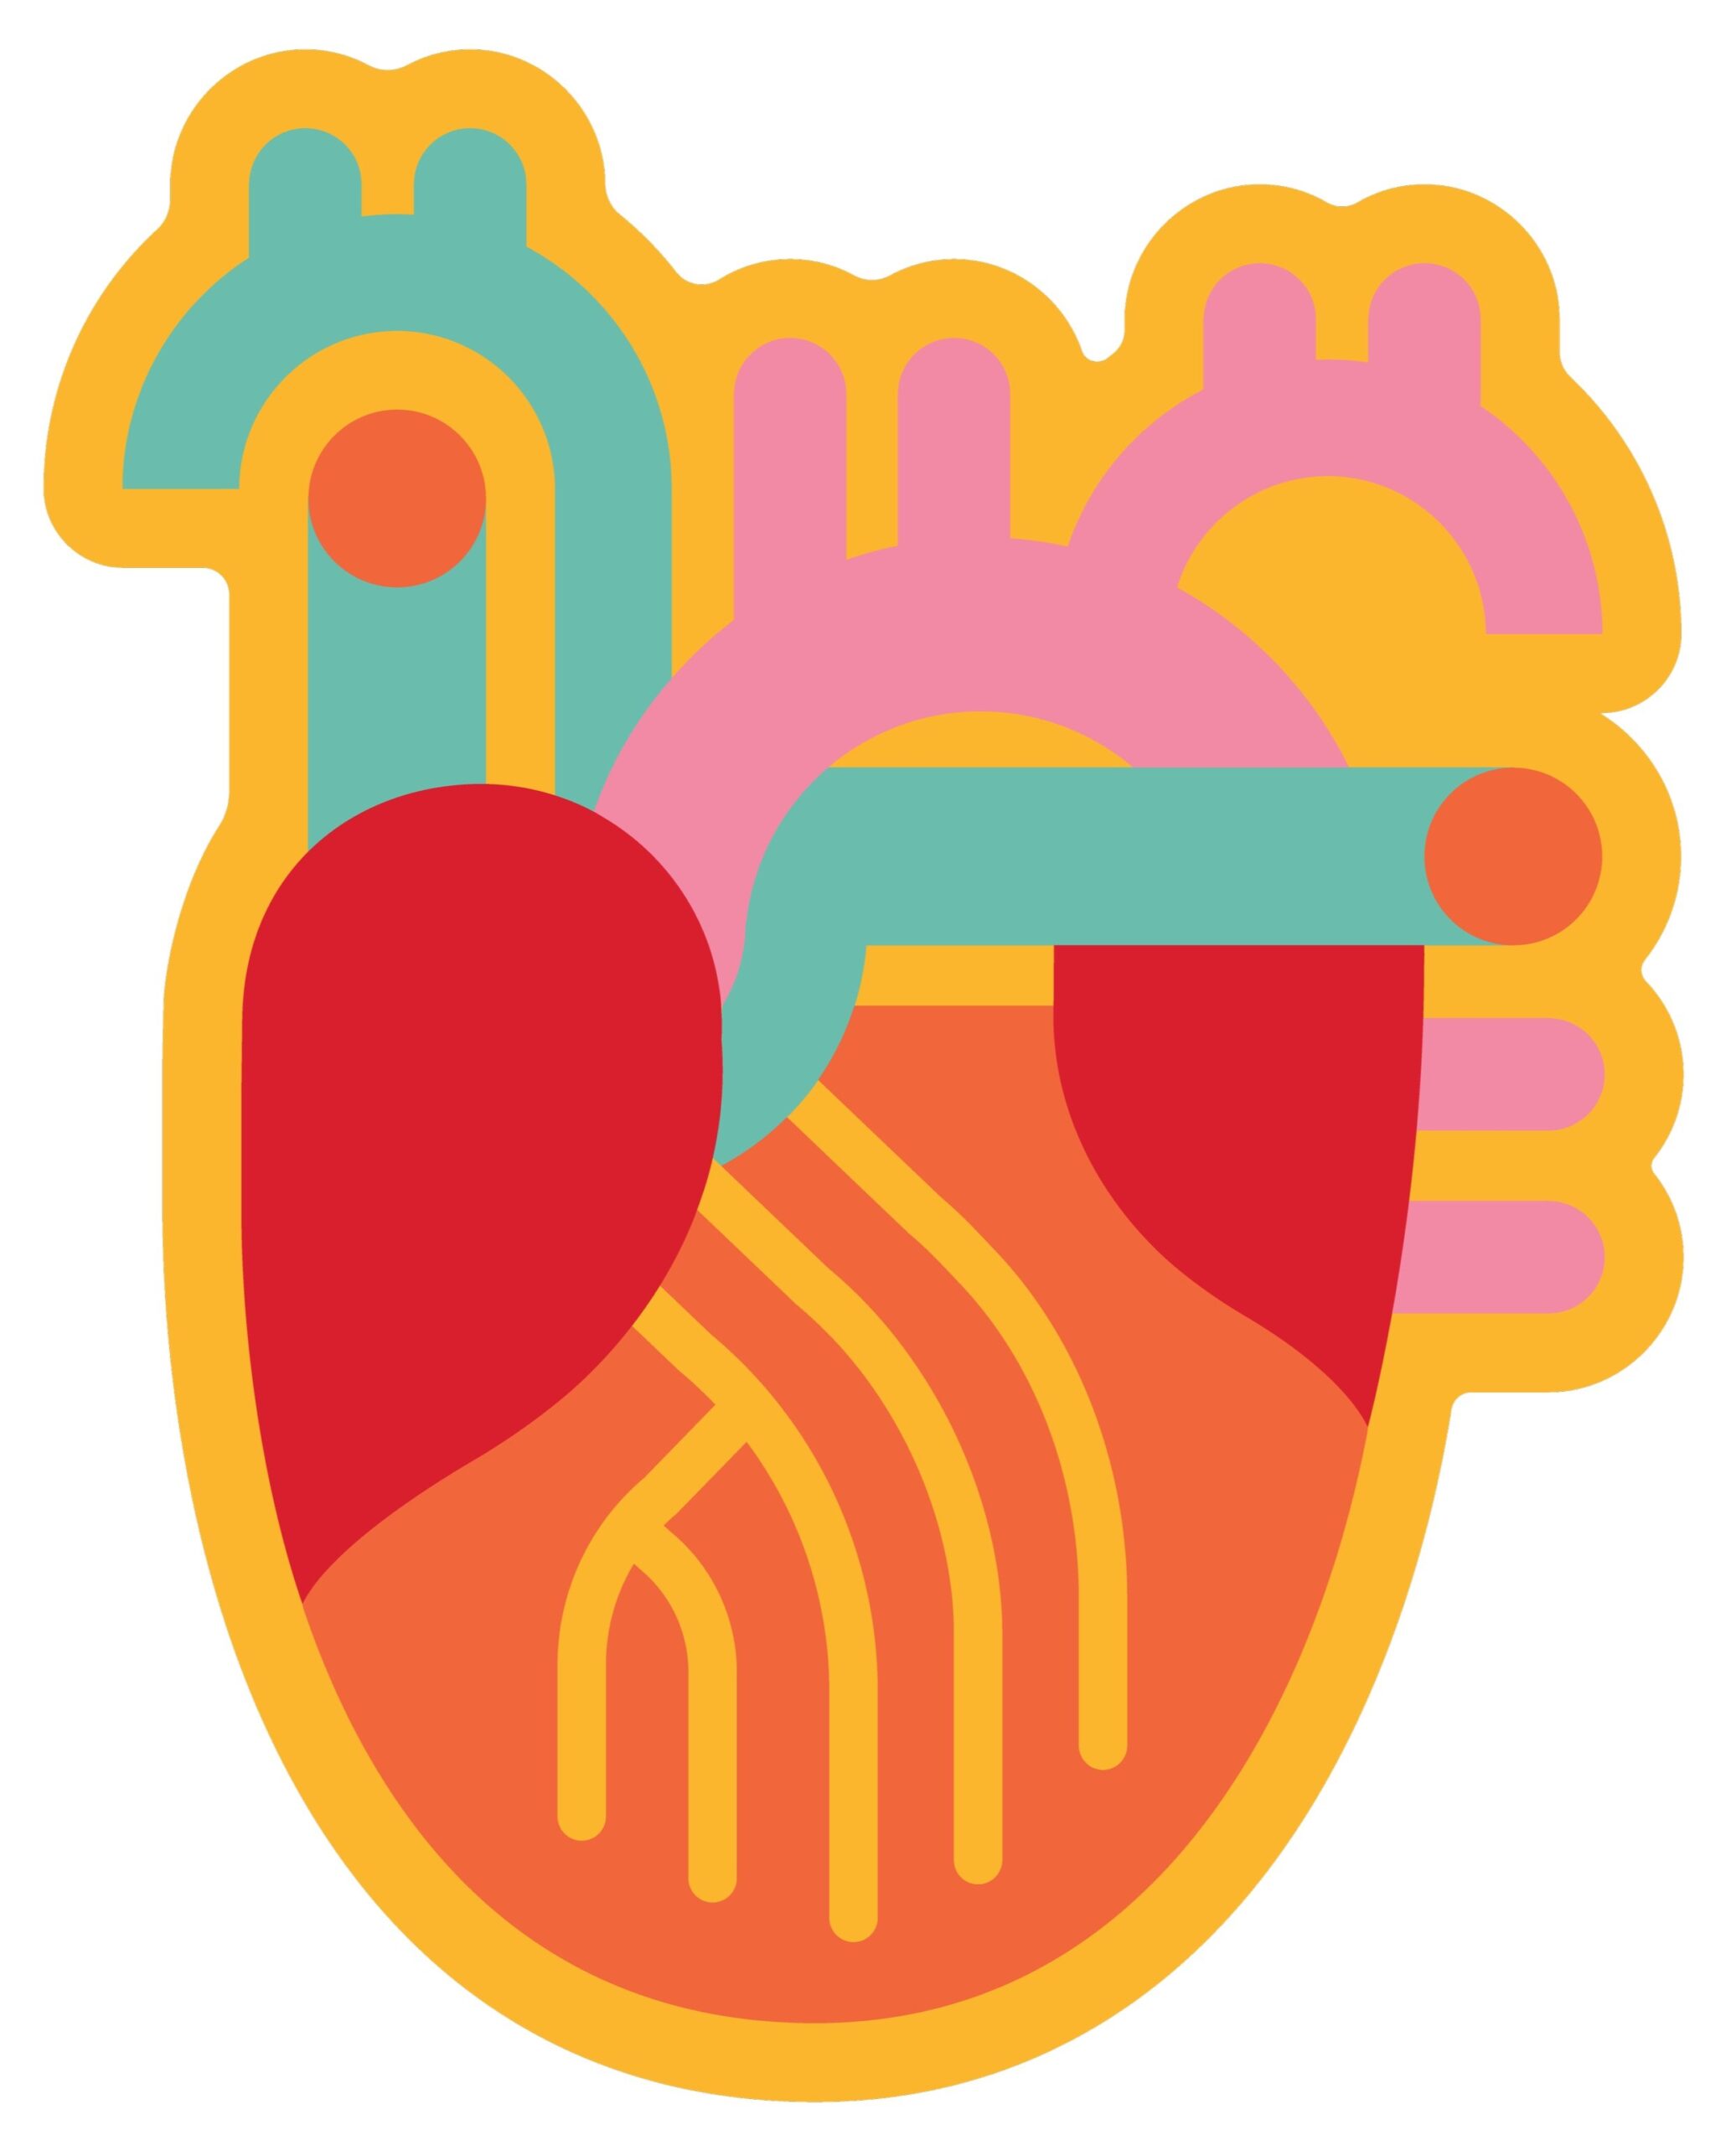 A colorful artistic rendering of a heart